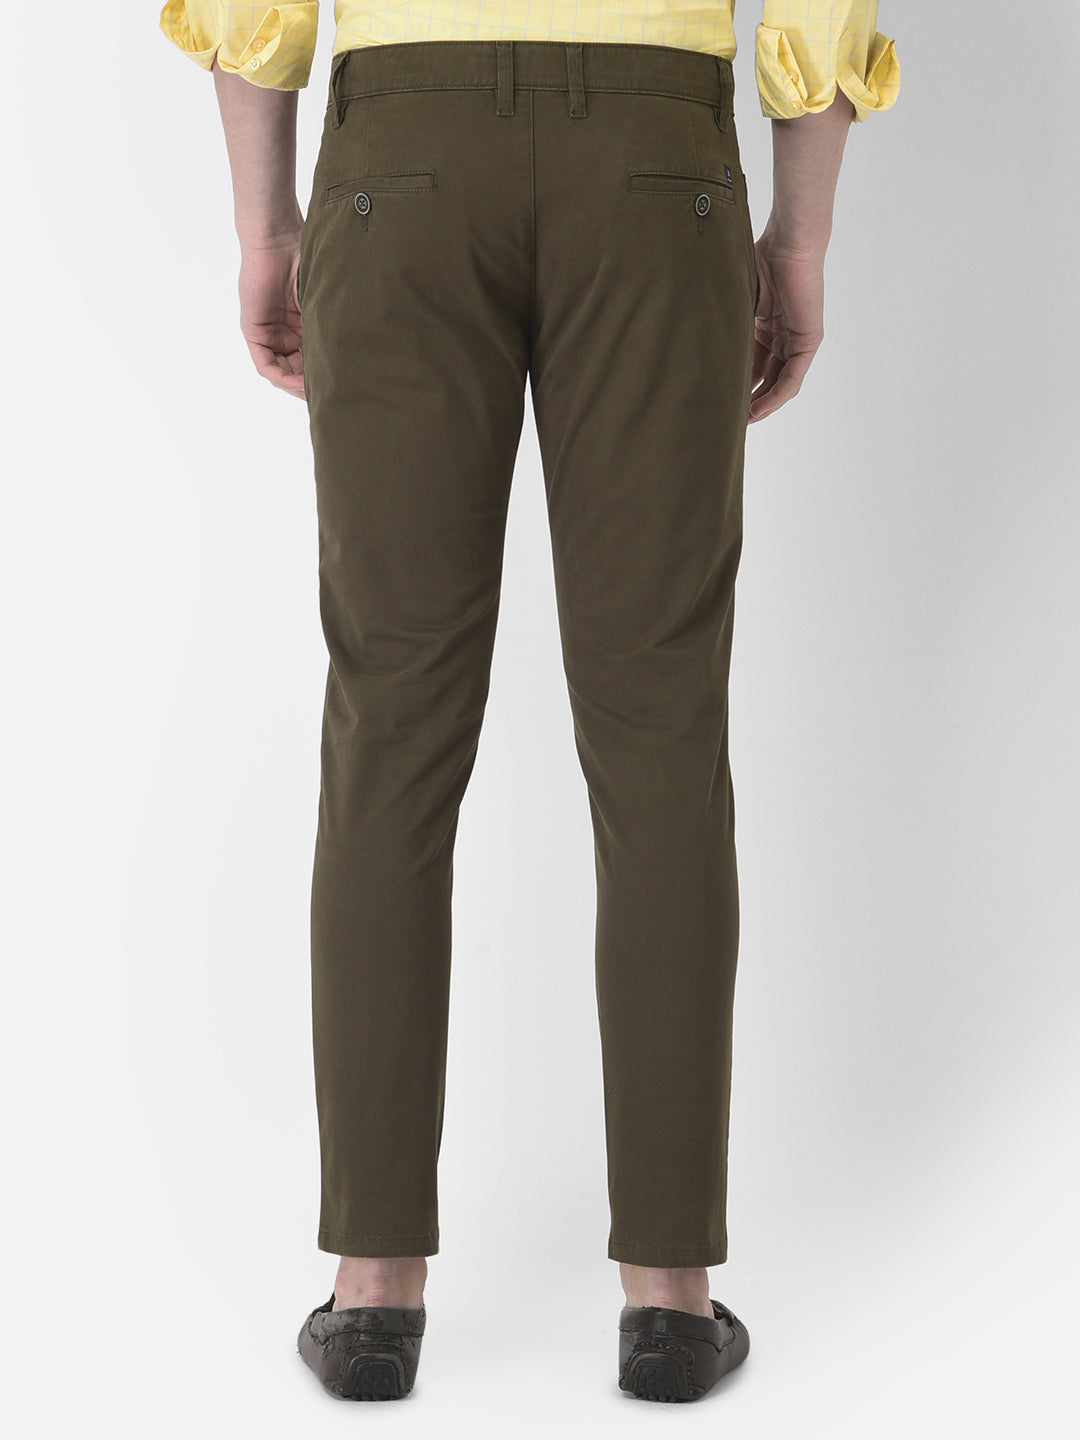  Formal Brown Business Trousers 